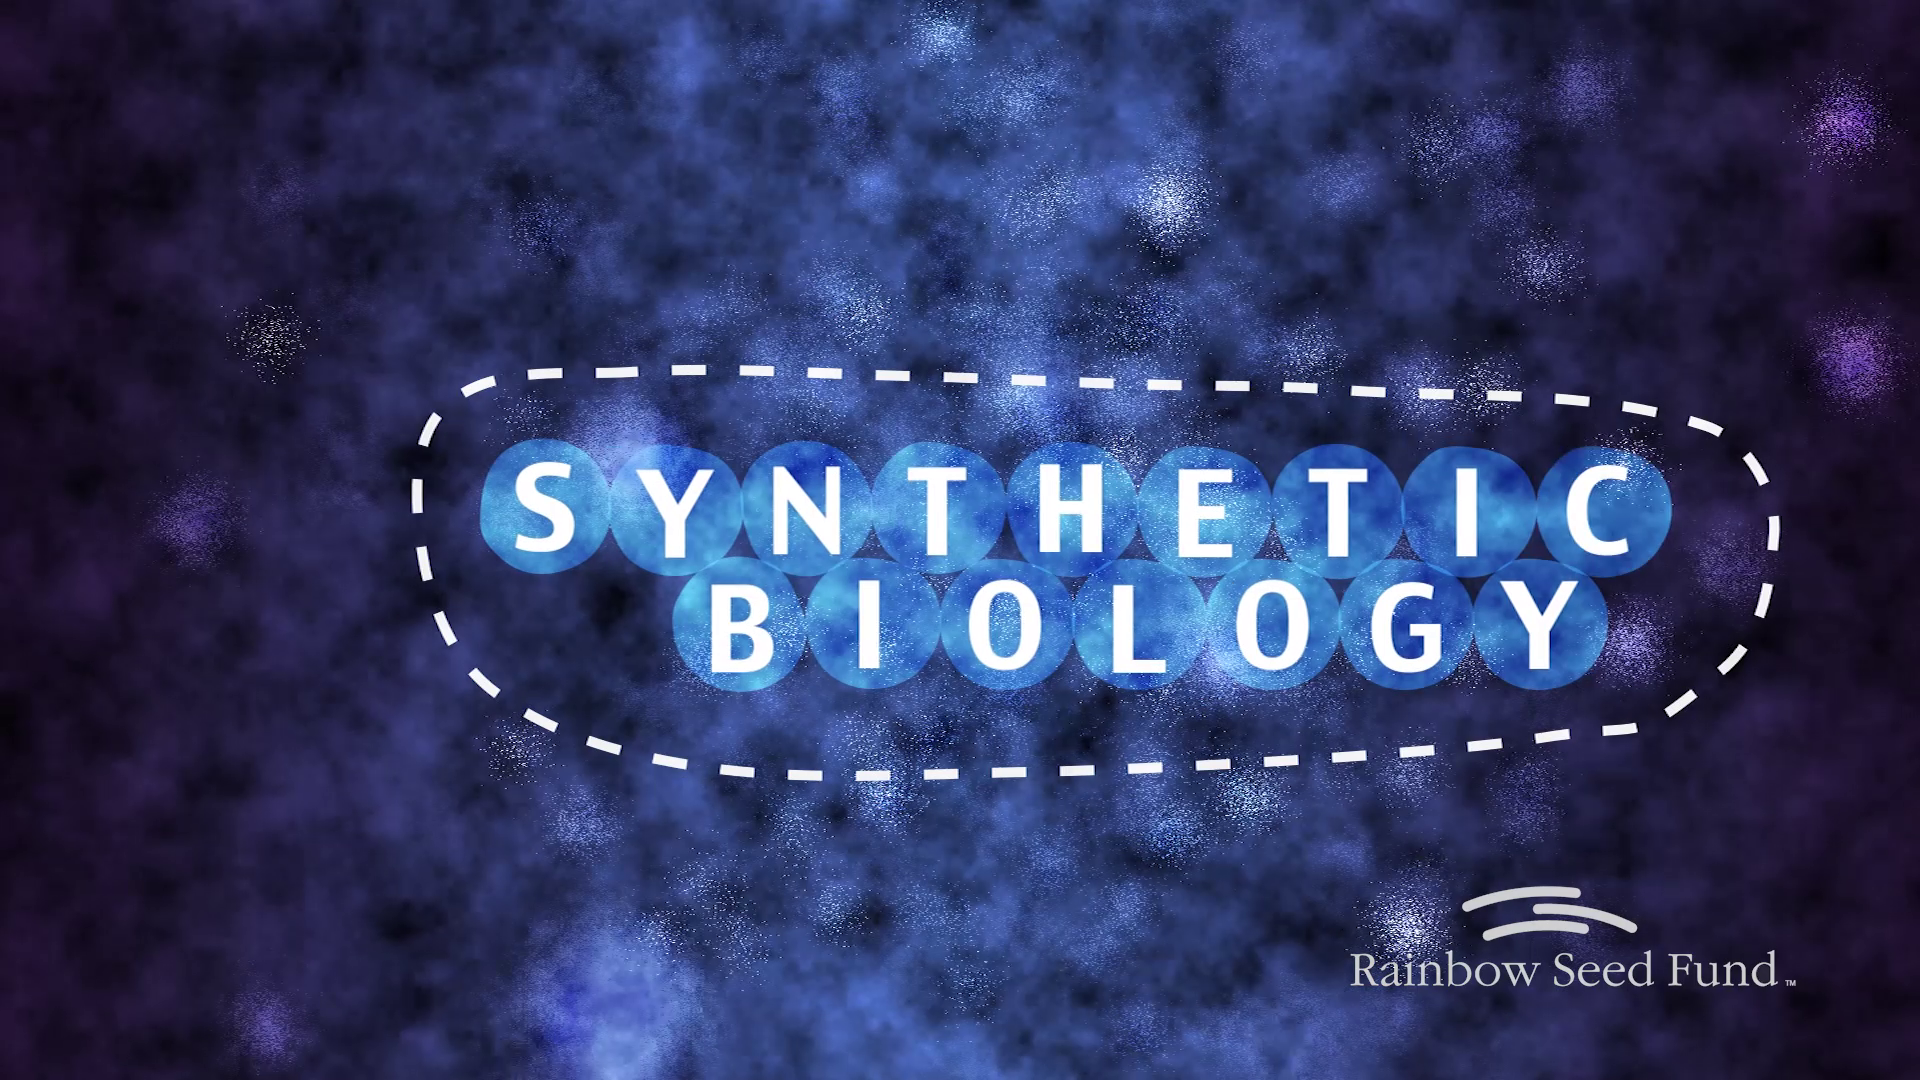 "What is synthetic biology?" video, Rainbow Seed Fund